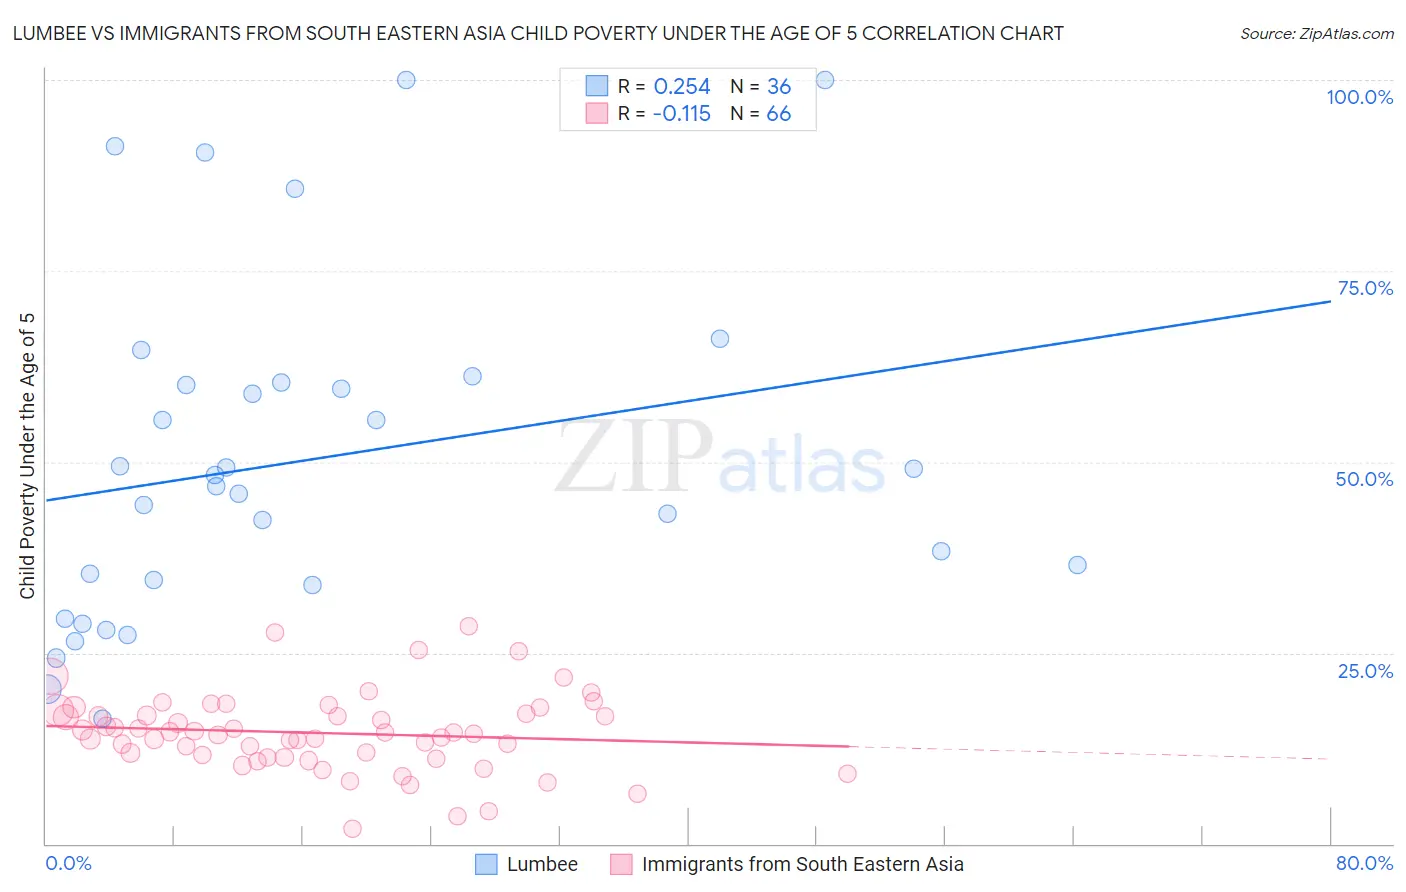 Lumbee vs Immigrants from South Eastern Asia Child Poverty Under the Age of 5